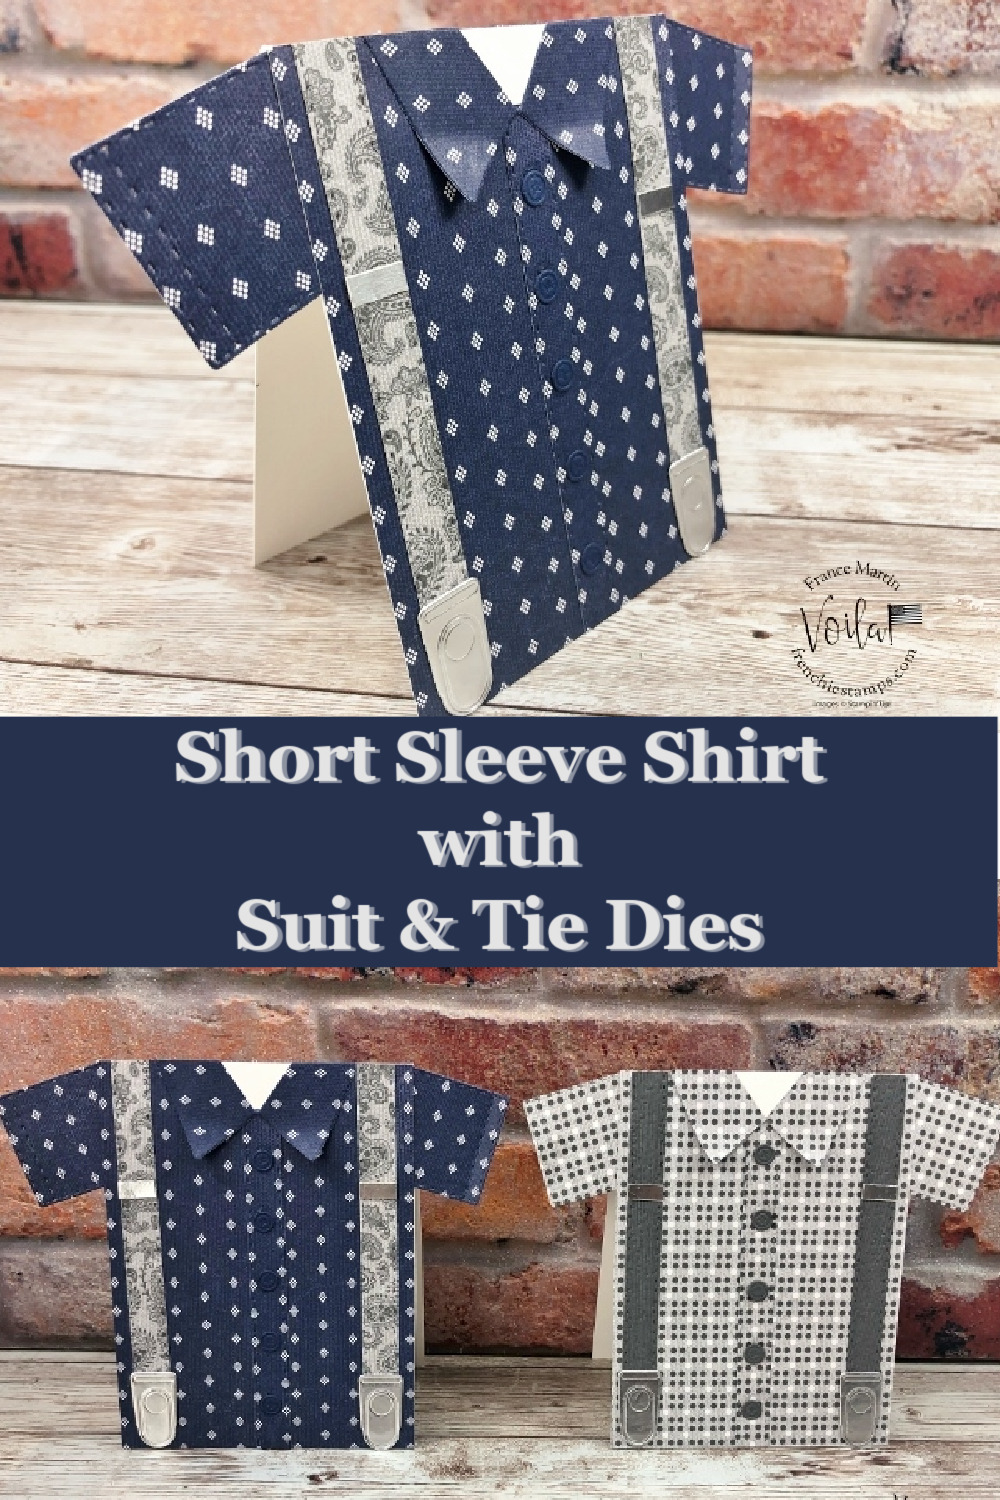 Shirt Card With Suit and Tie Dies